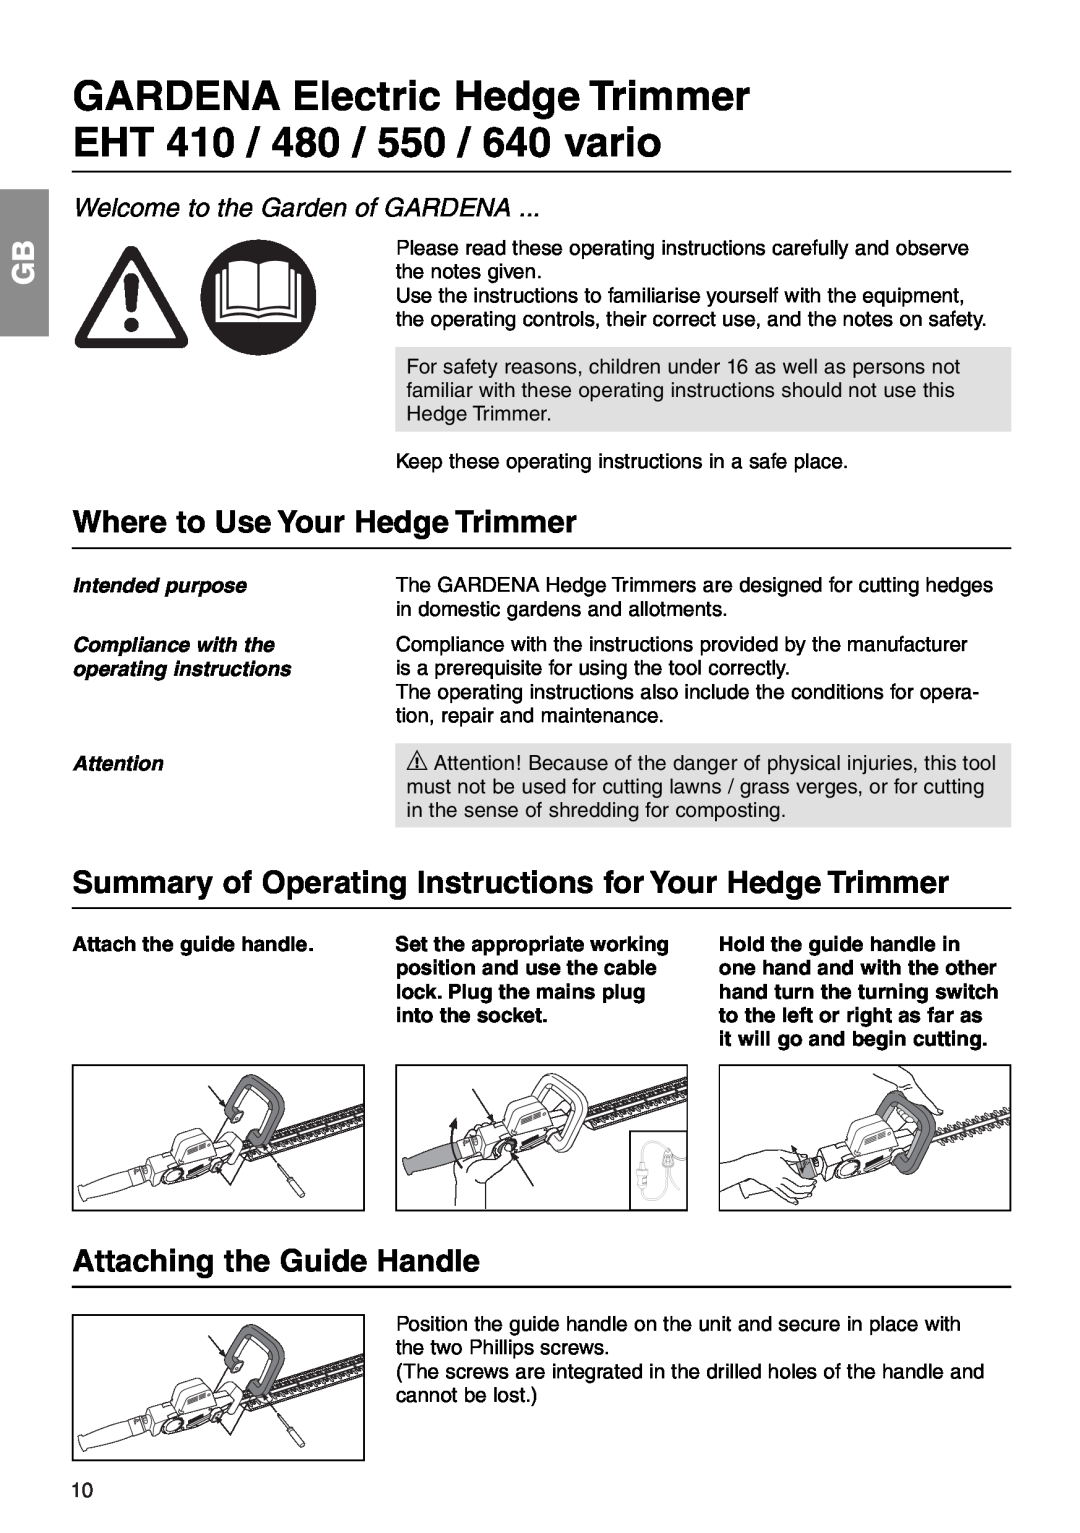 Gardena 640 Where to Use Your Hedge Trimmer, Summary of Operating Instructions for Your Hedge Trimmer, into the socket 